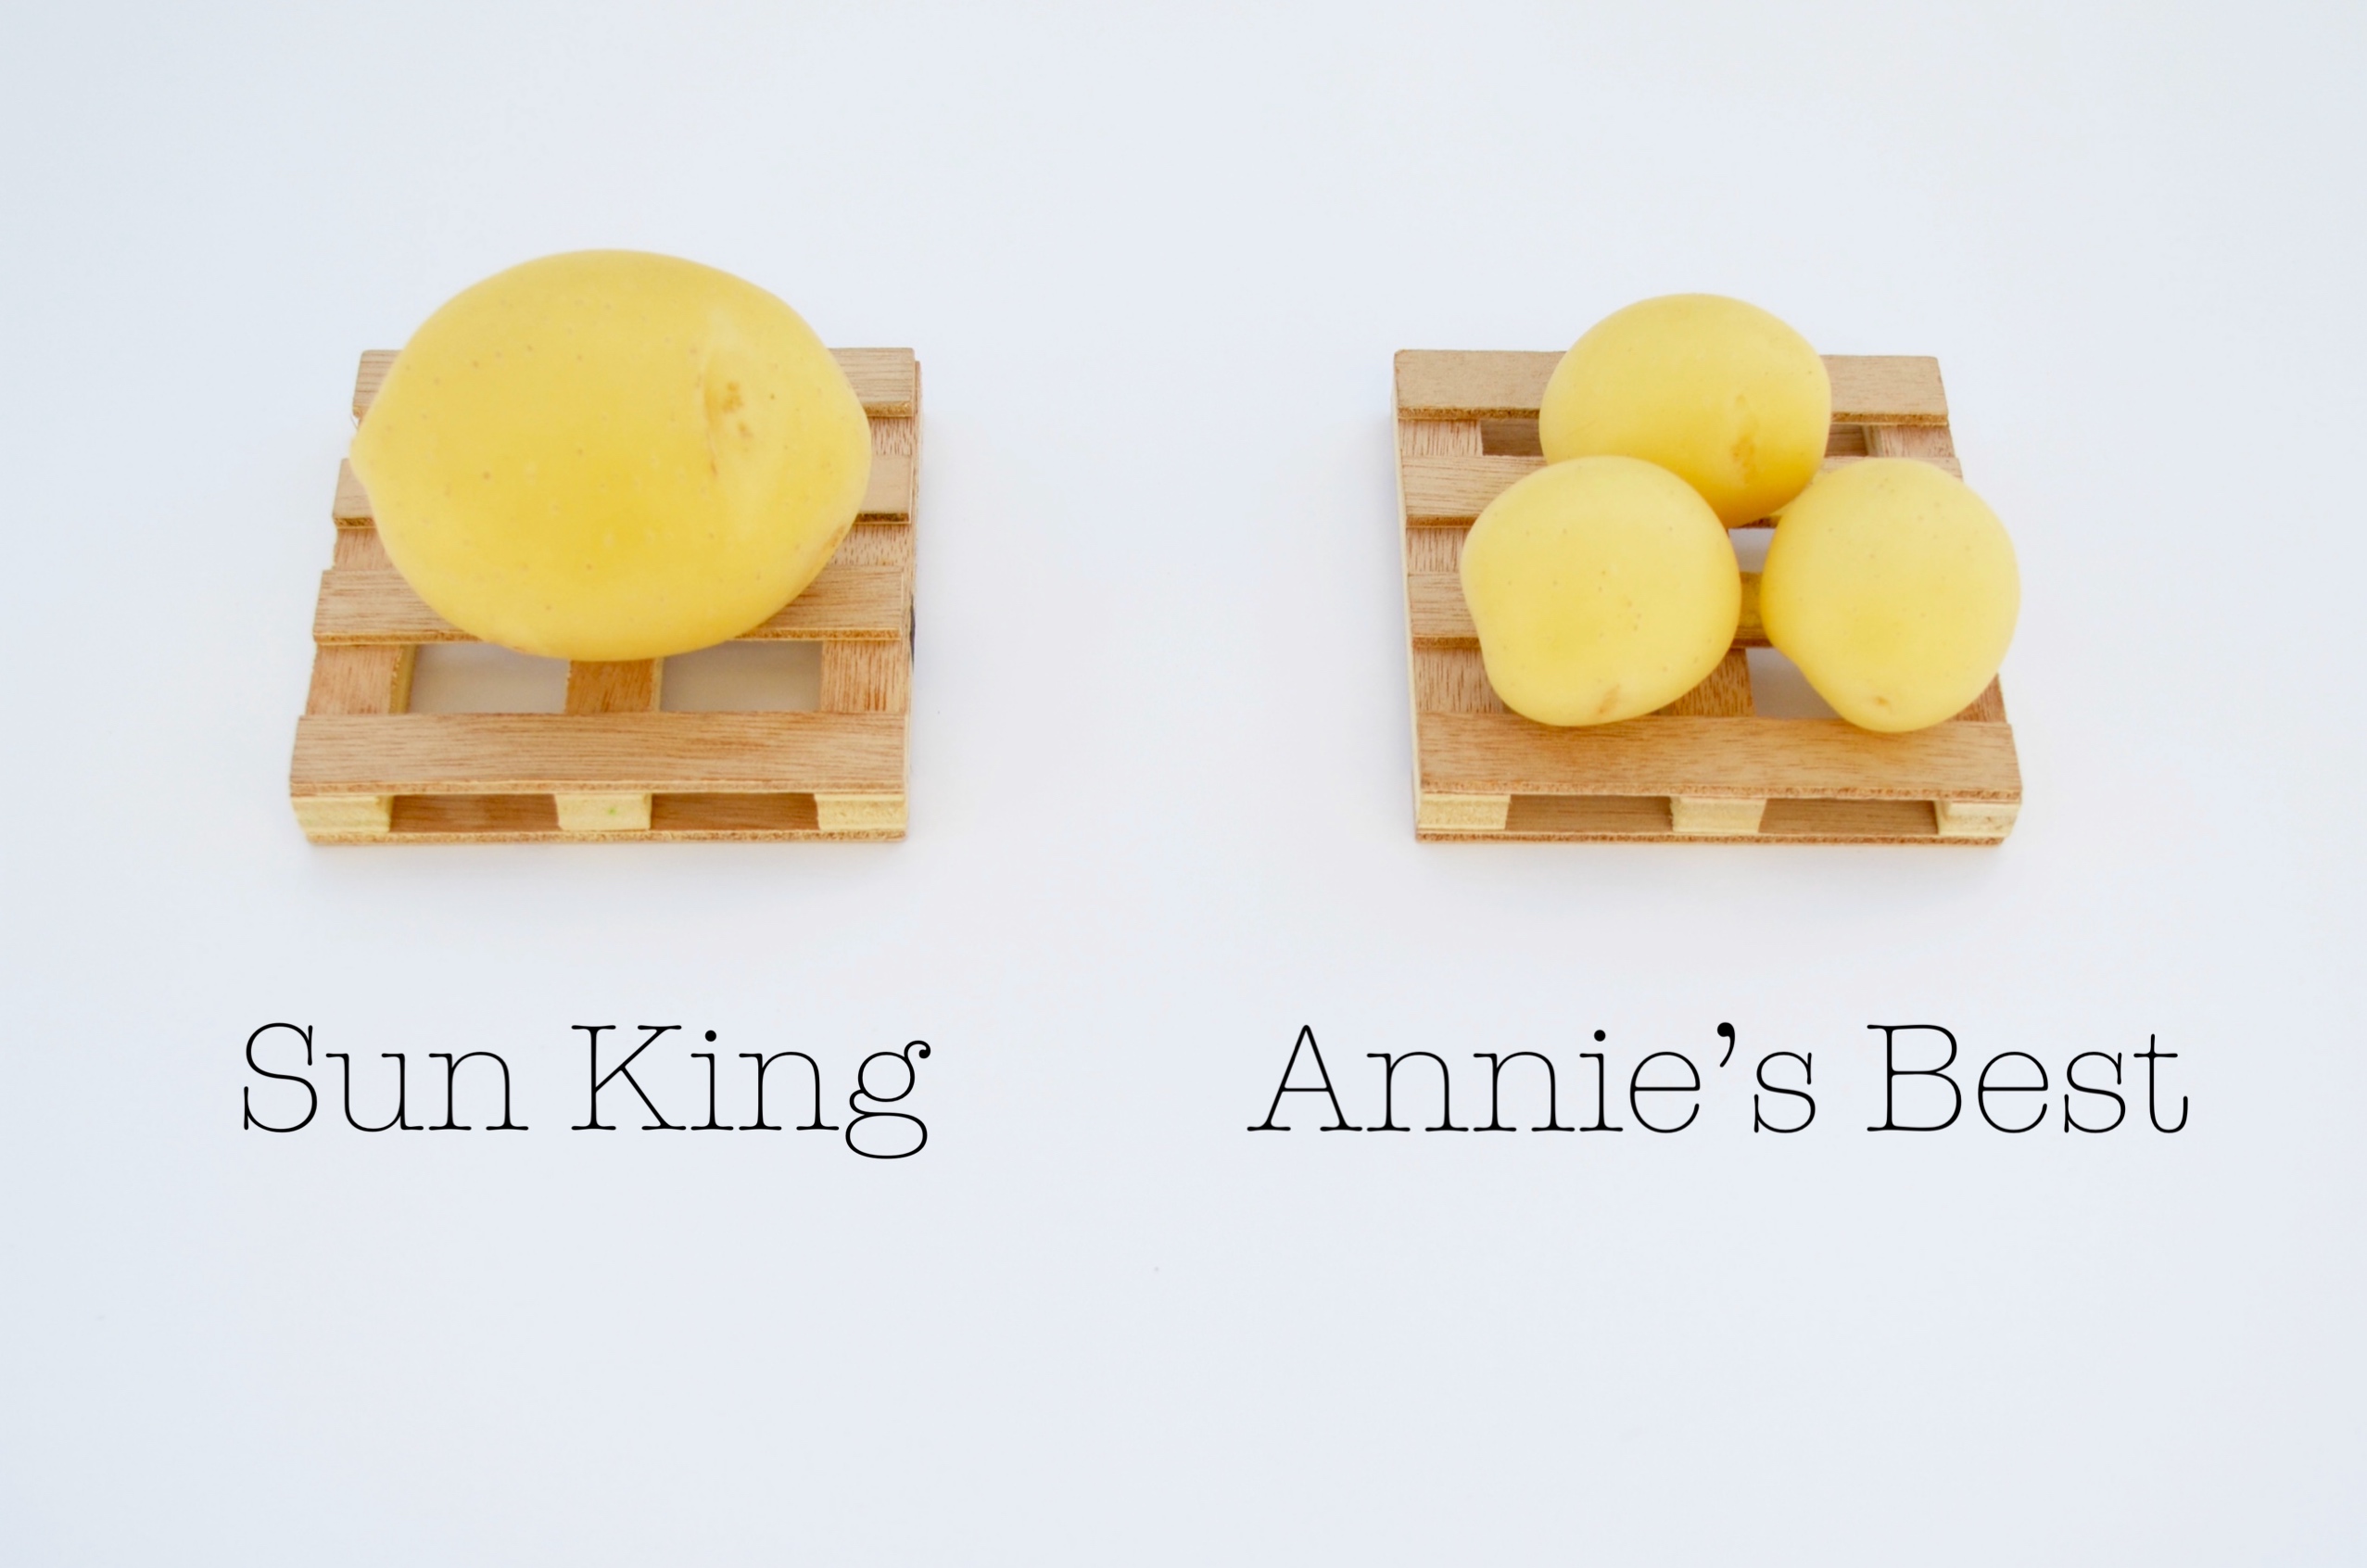 side by side comparison of sun king & annie's best potatoes